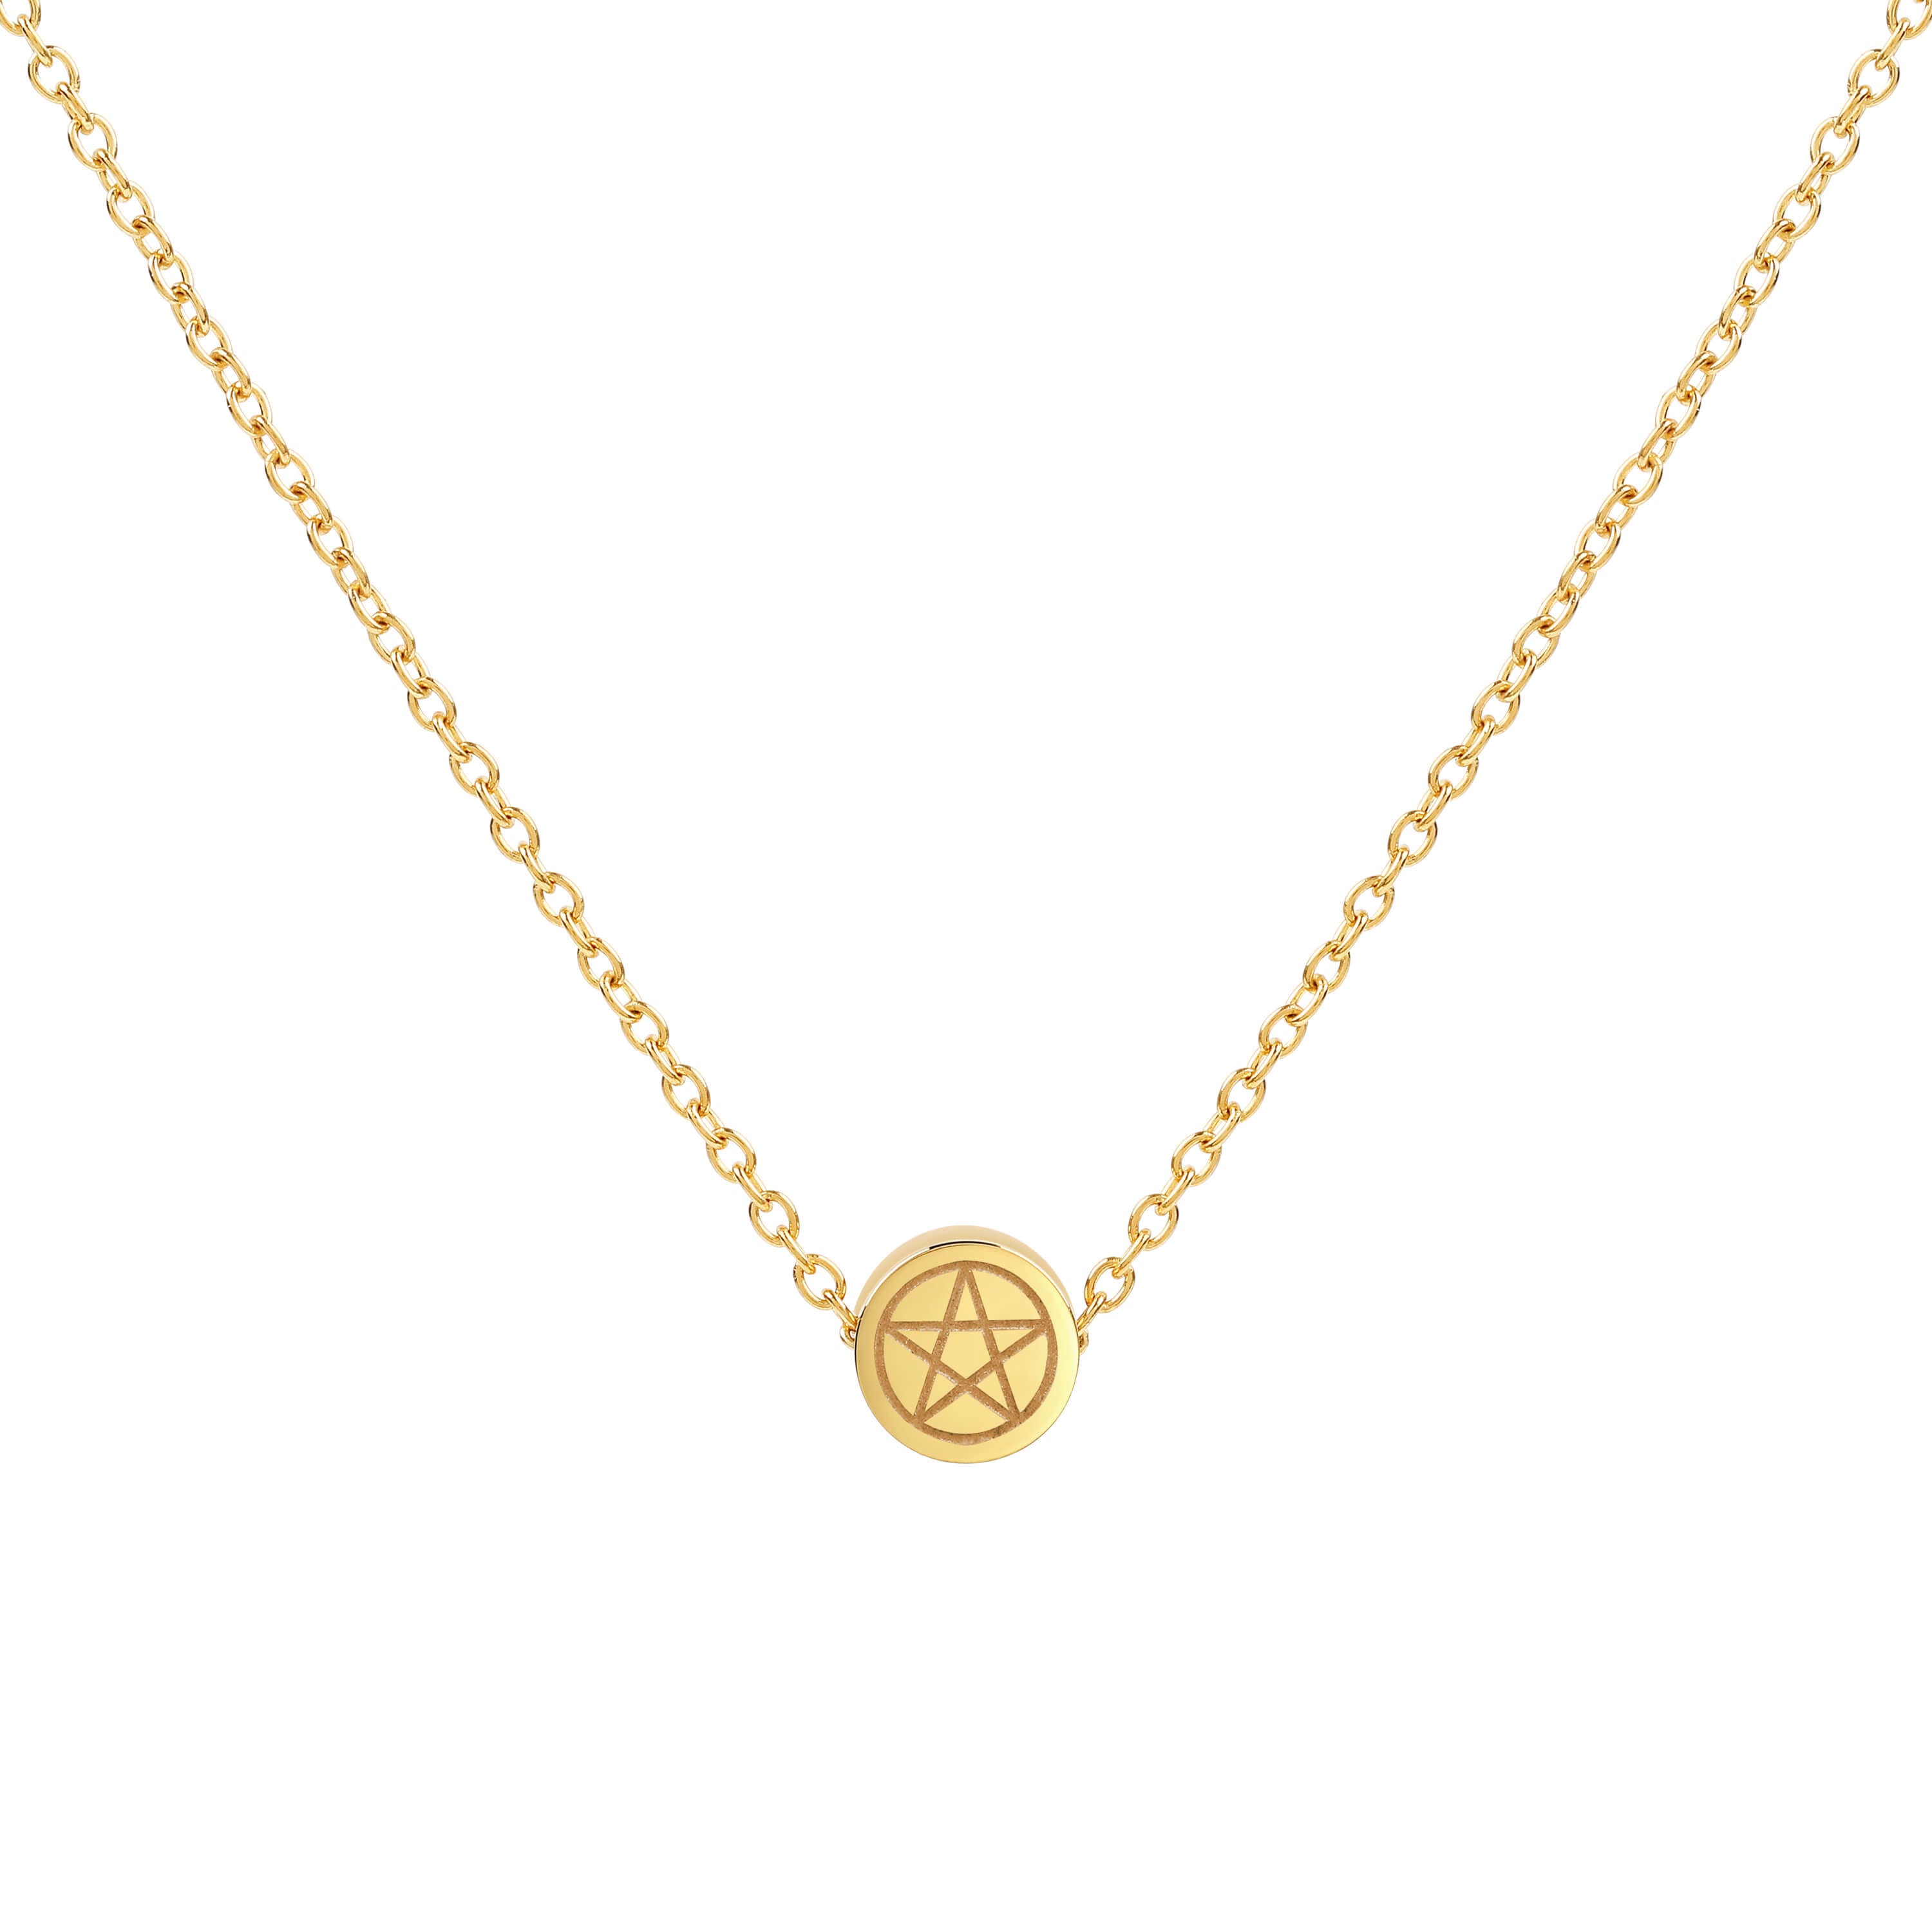 Pentacle Mini Pendant Necklace (Stainless Steel)